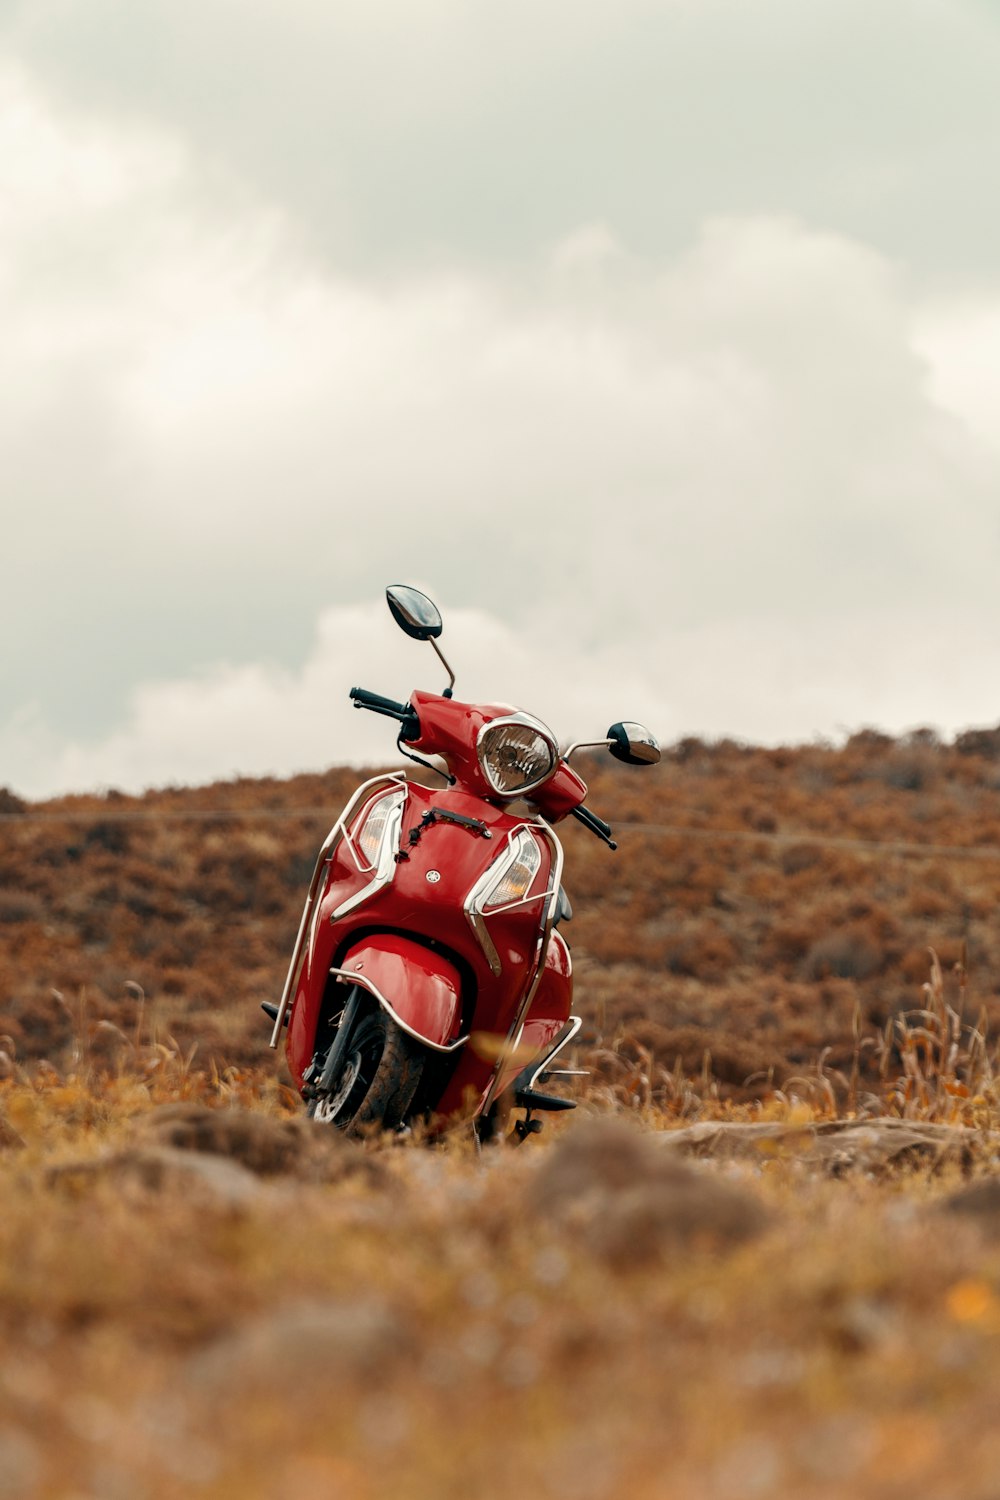 red and black motorcycle on brown grass field under white clouds during daytime